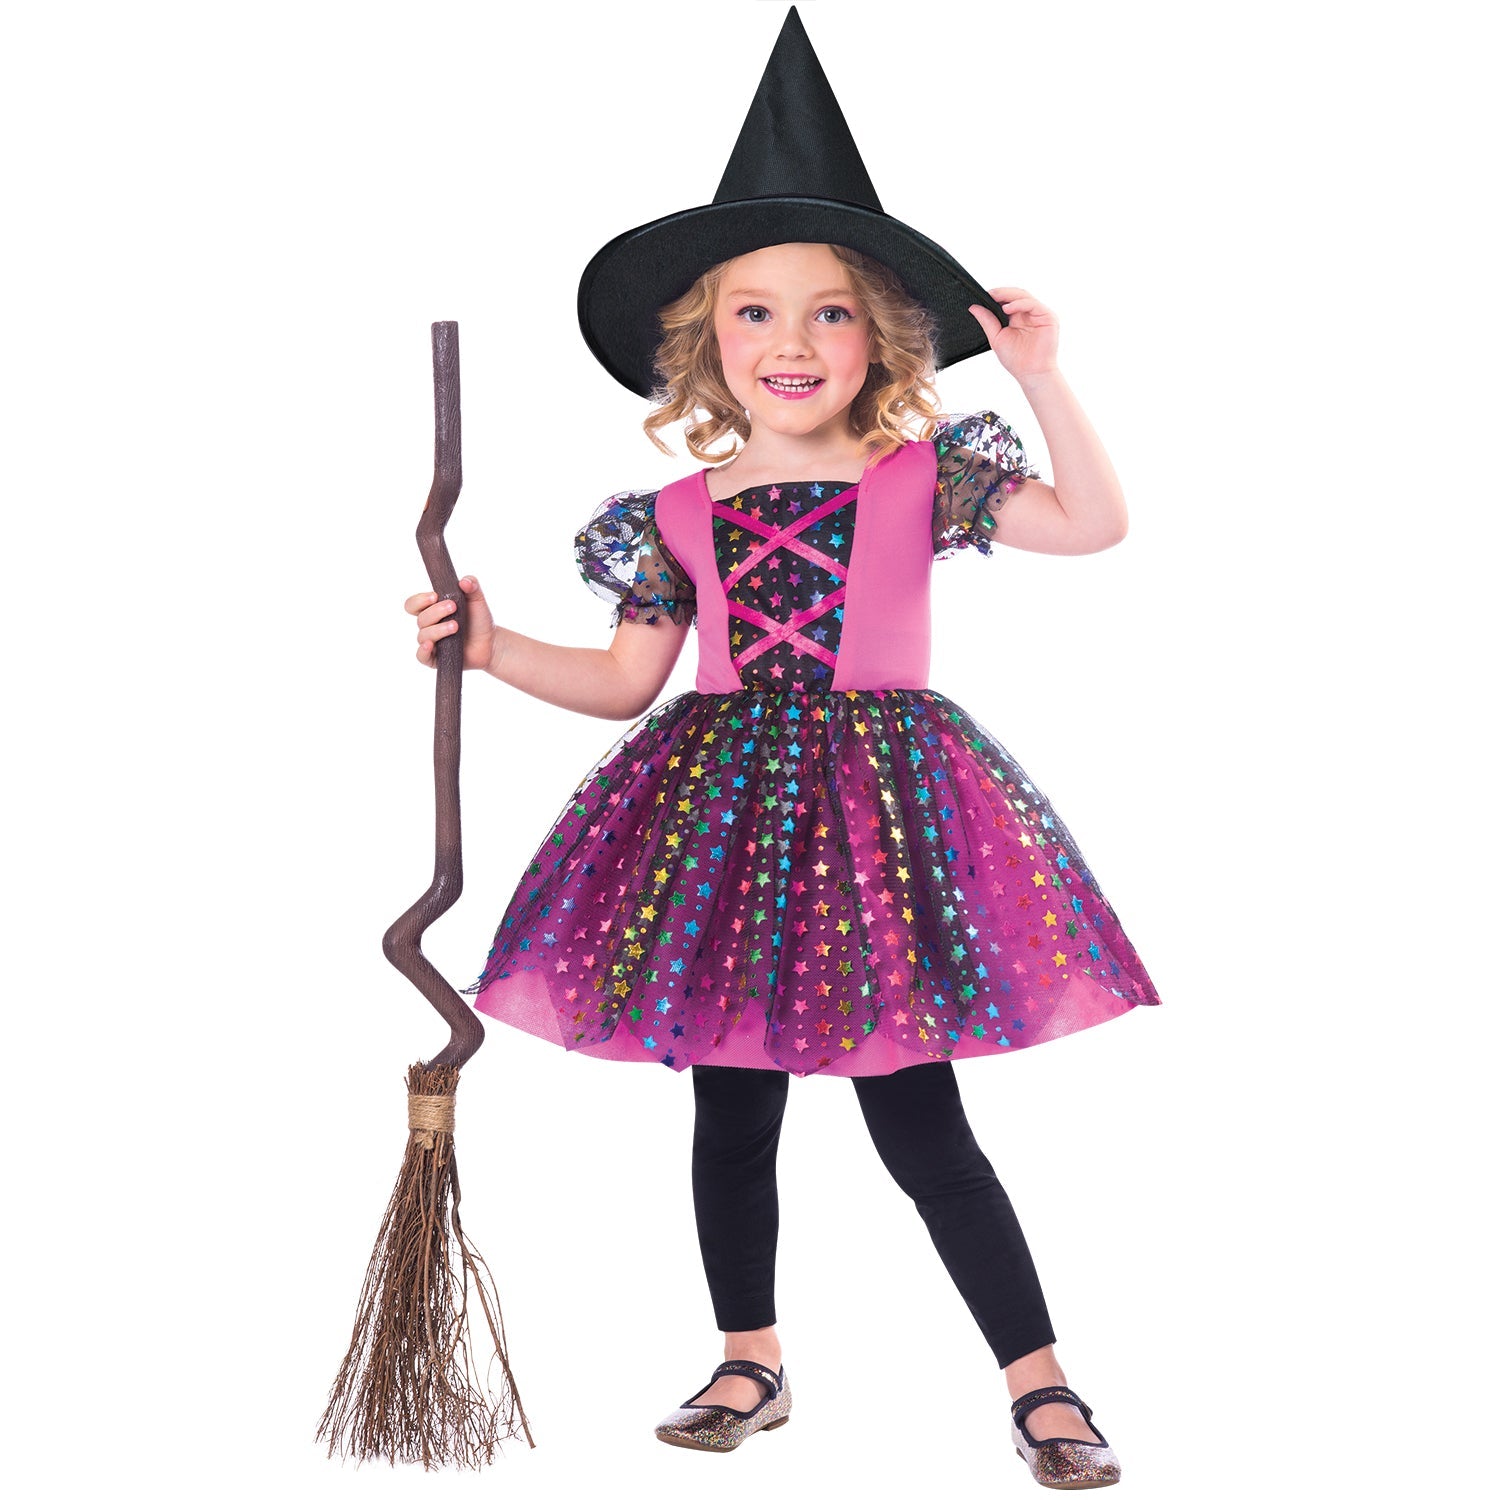 Girls Rainbow Witch Halloween Costume includes dress and hat